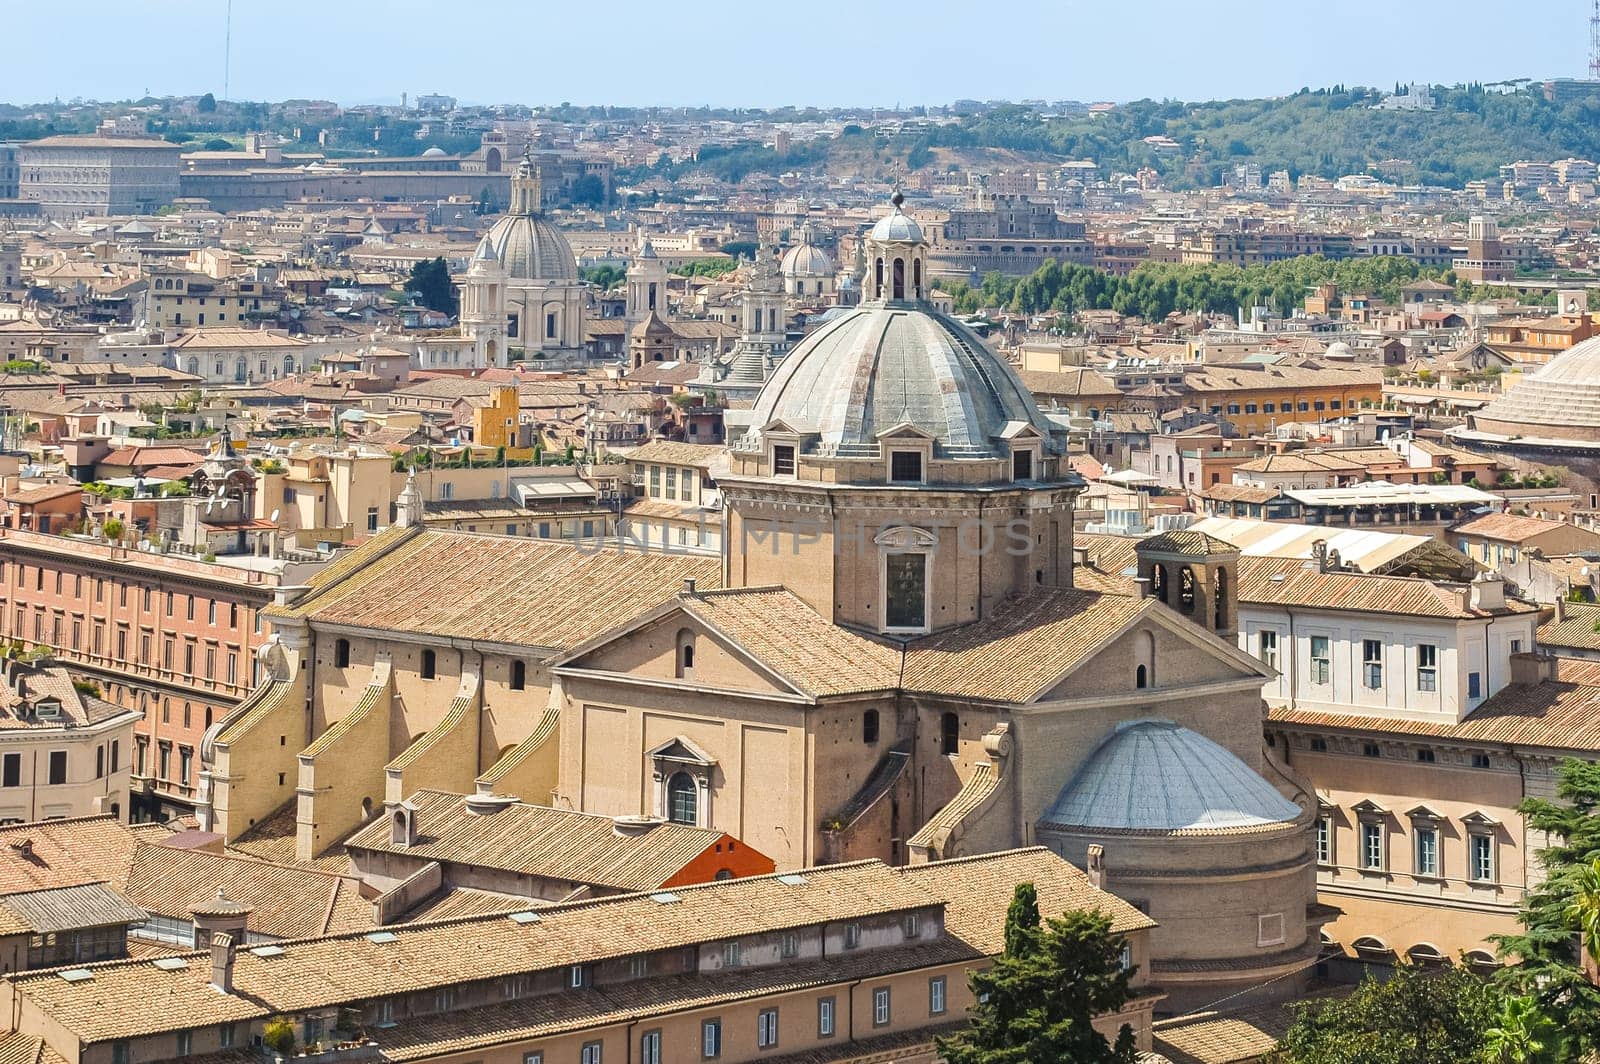 Panoramic view of Rome from the Vittoriano with the Church of the Gesu, seat of the Jesuit order, in the foreground, with the dome of Saint Agnes in Piazza Navona in the background